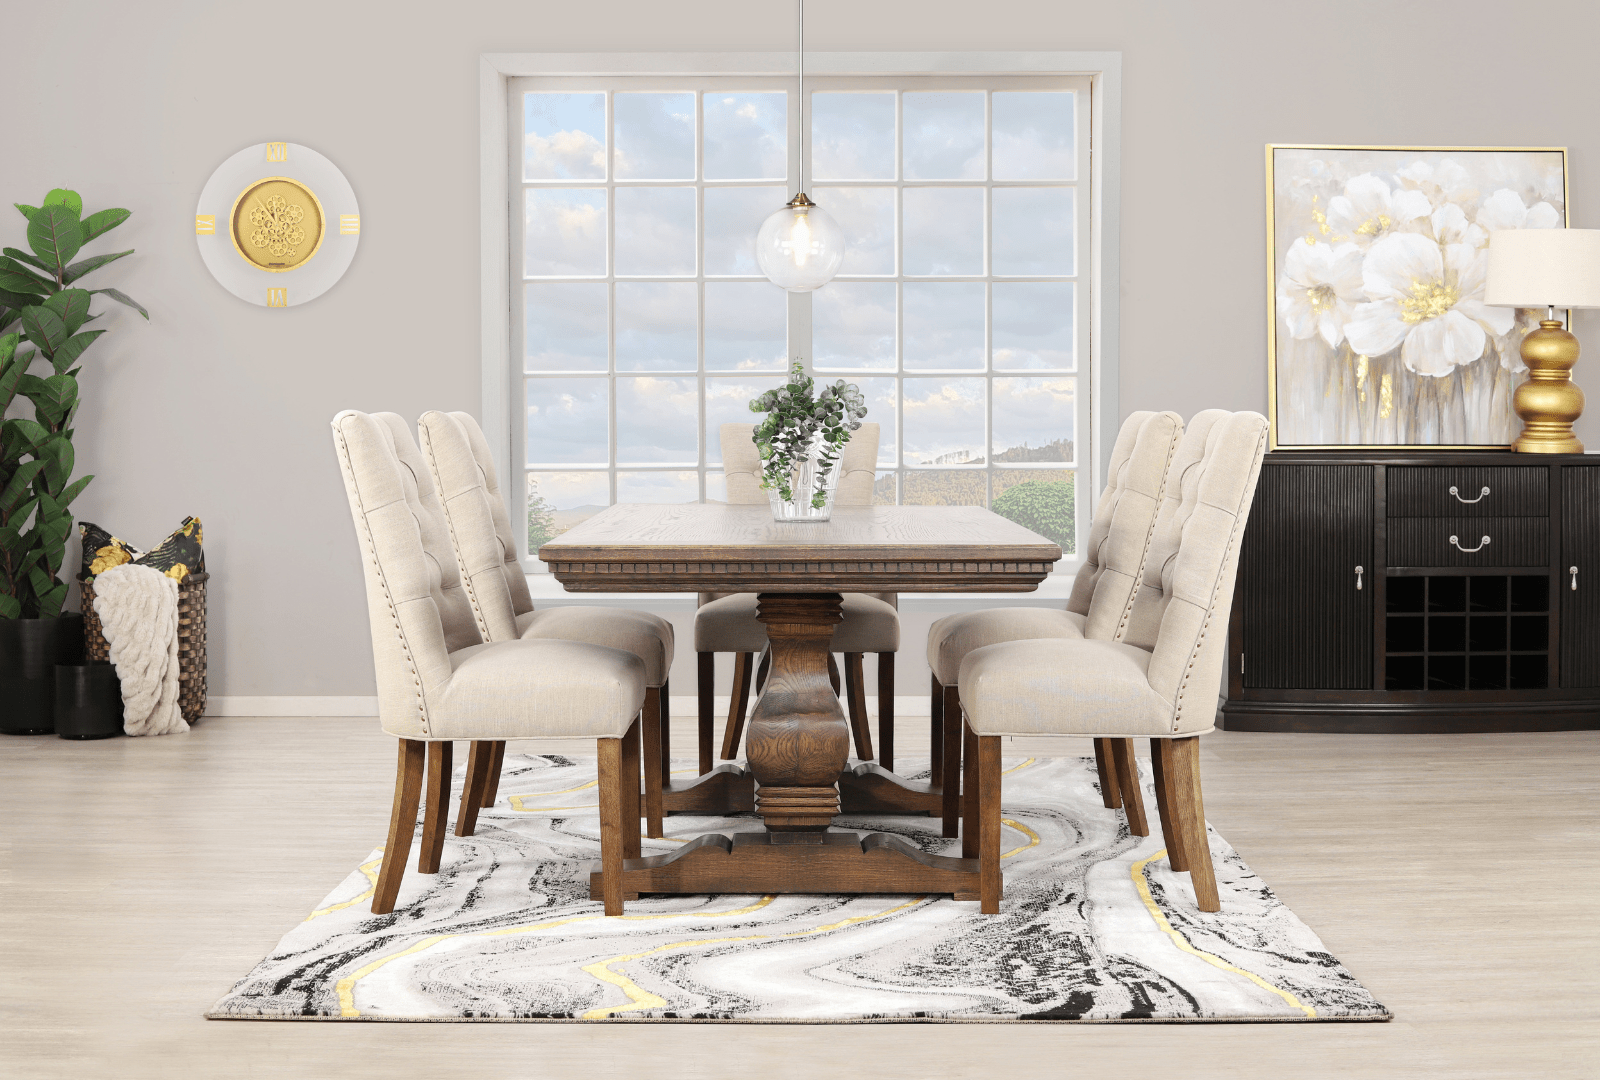 Rustic Elegance in Dining Room Décor: Furniture Choices & Personalised Charm